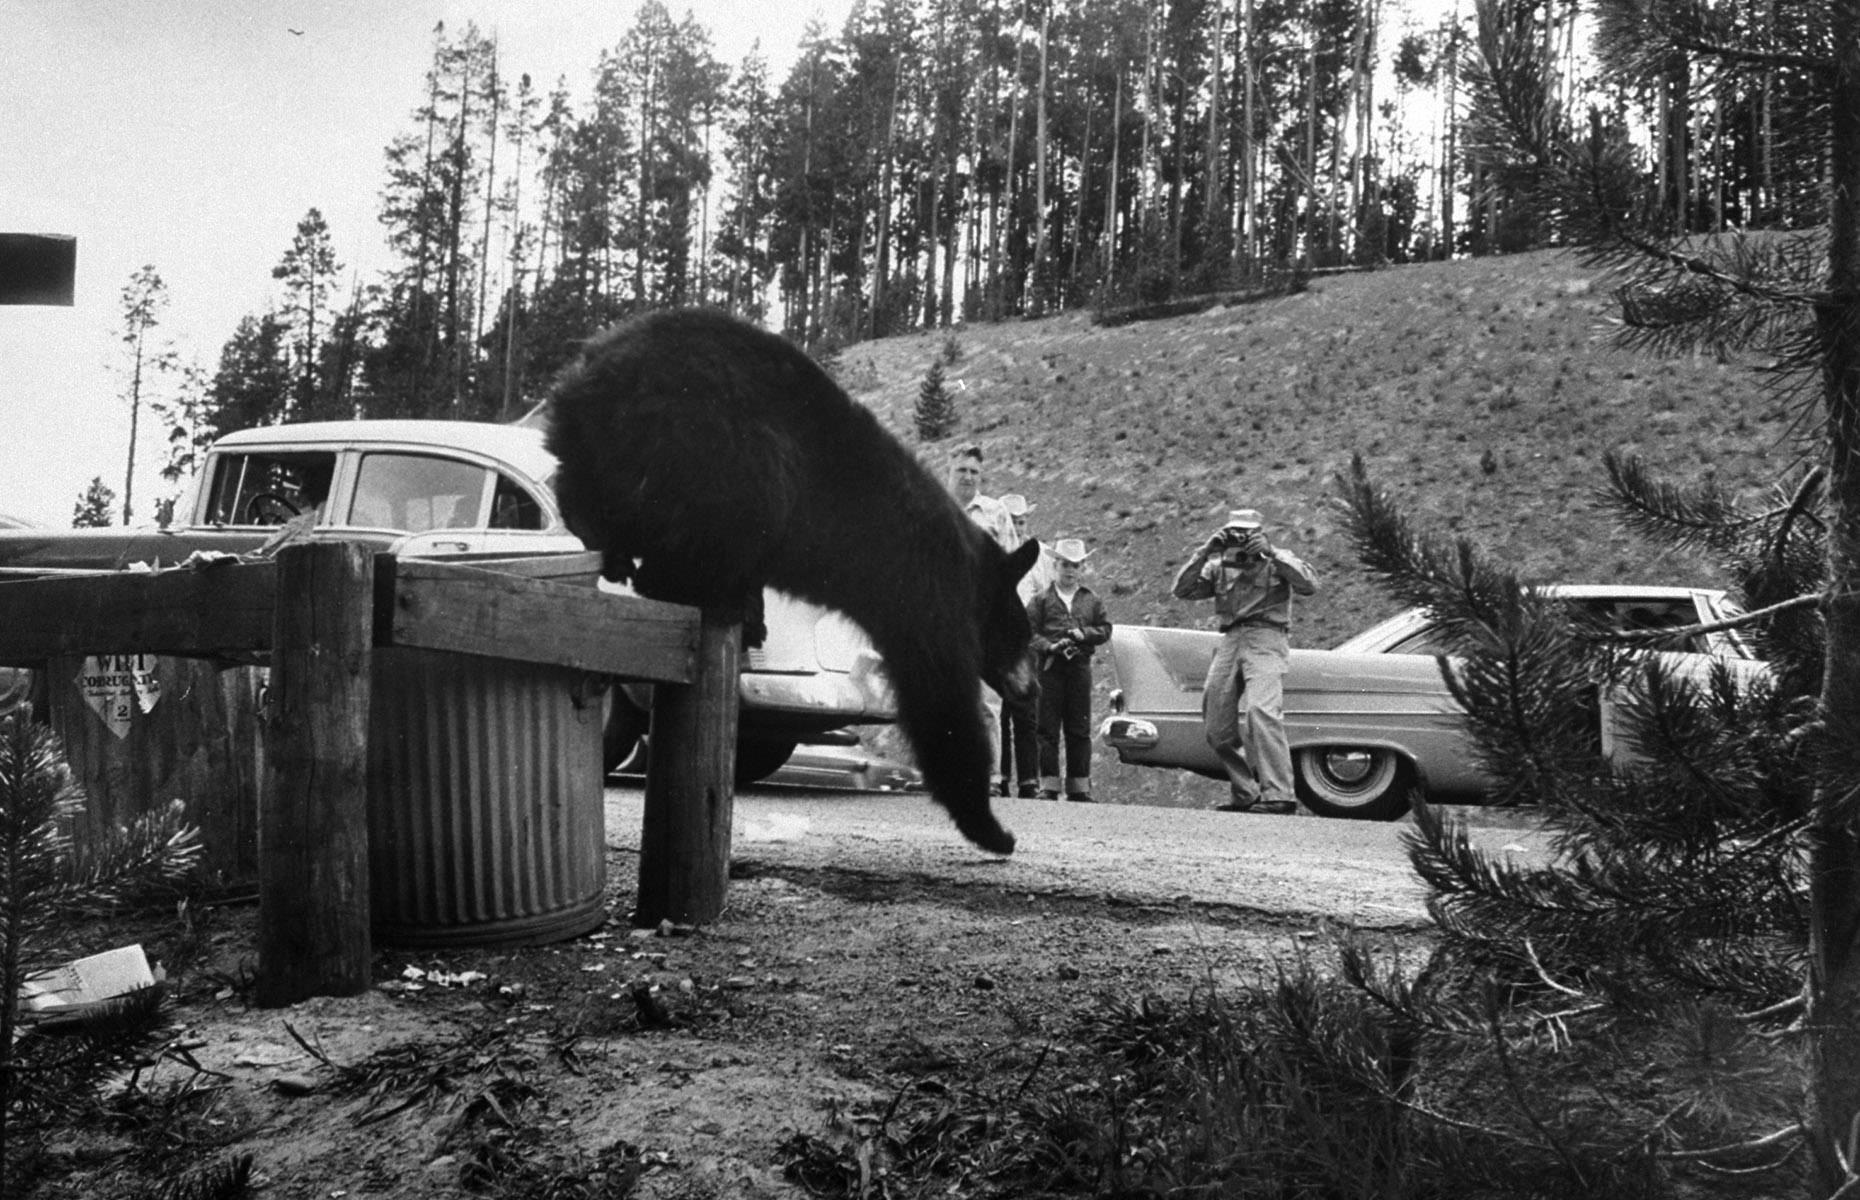 <p>Open-pit garbage dumps, which existed in Yellowstone right up until the 1970s, attracted bears and also reckless tourists uneducated in bear safety, who would exit their vehicles to snap the perfect shot. It's estimated by the NPS that, up to 1960, there were <a href="https://www.nps.gov/yell/learn/management/bear-management.htm">around 48 bear-inflicted human injuries</a> each year at the park.</p>